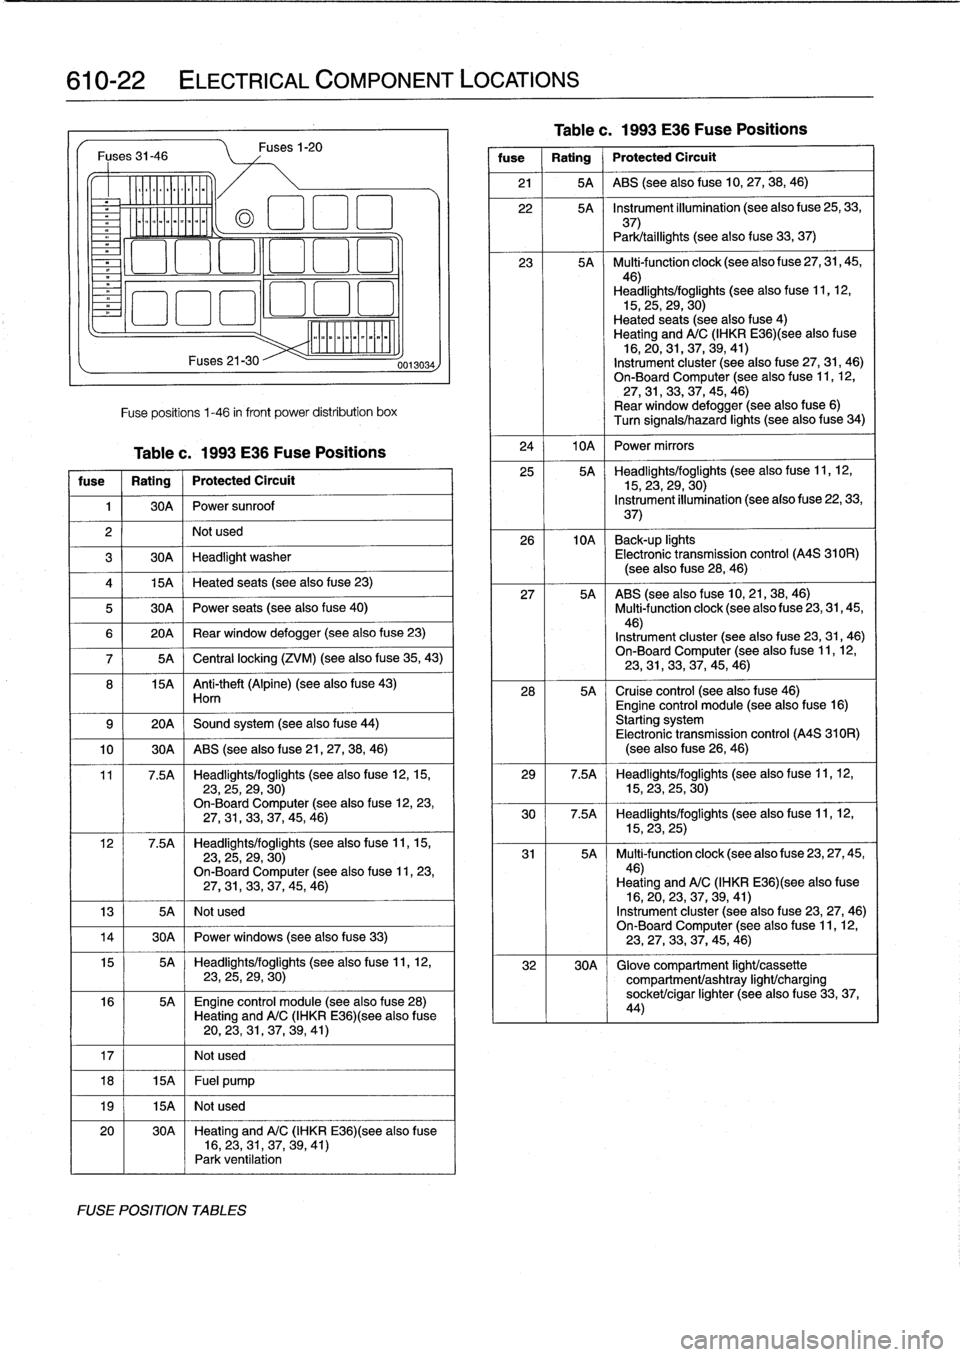 BMW 318i 1997 E36 Service Manual 
610-22

	

ELECTRICAL
COMPONENT
LOCATIONS

Fuses
31-46

Ylililll

milililil
Fuses
21-30
Fuse
positions
1-46
in
front
Power
distribution
box

Table
c
.
1993
E36
Fuse
Positions

fuse

	

1
Rating

	

j